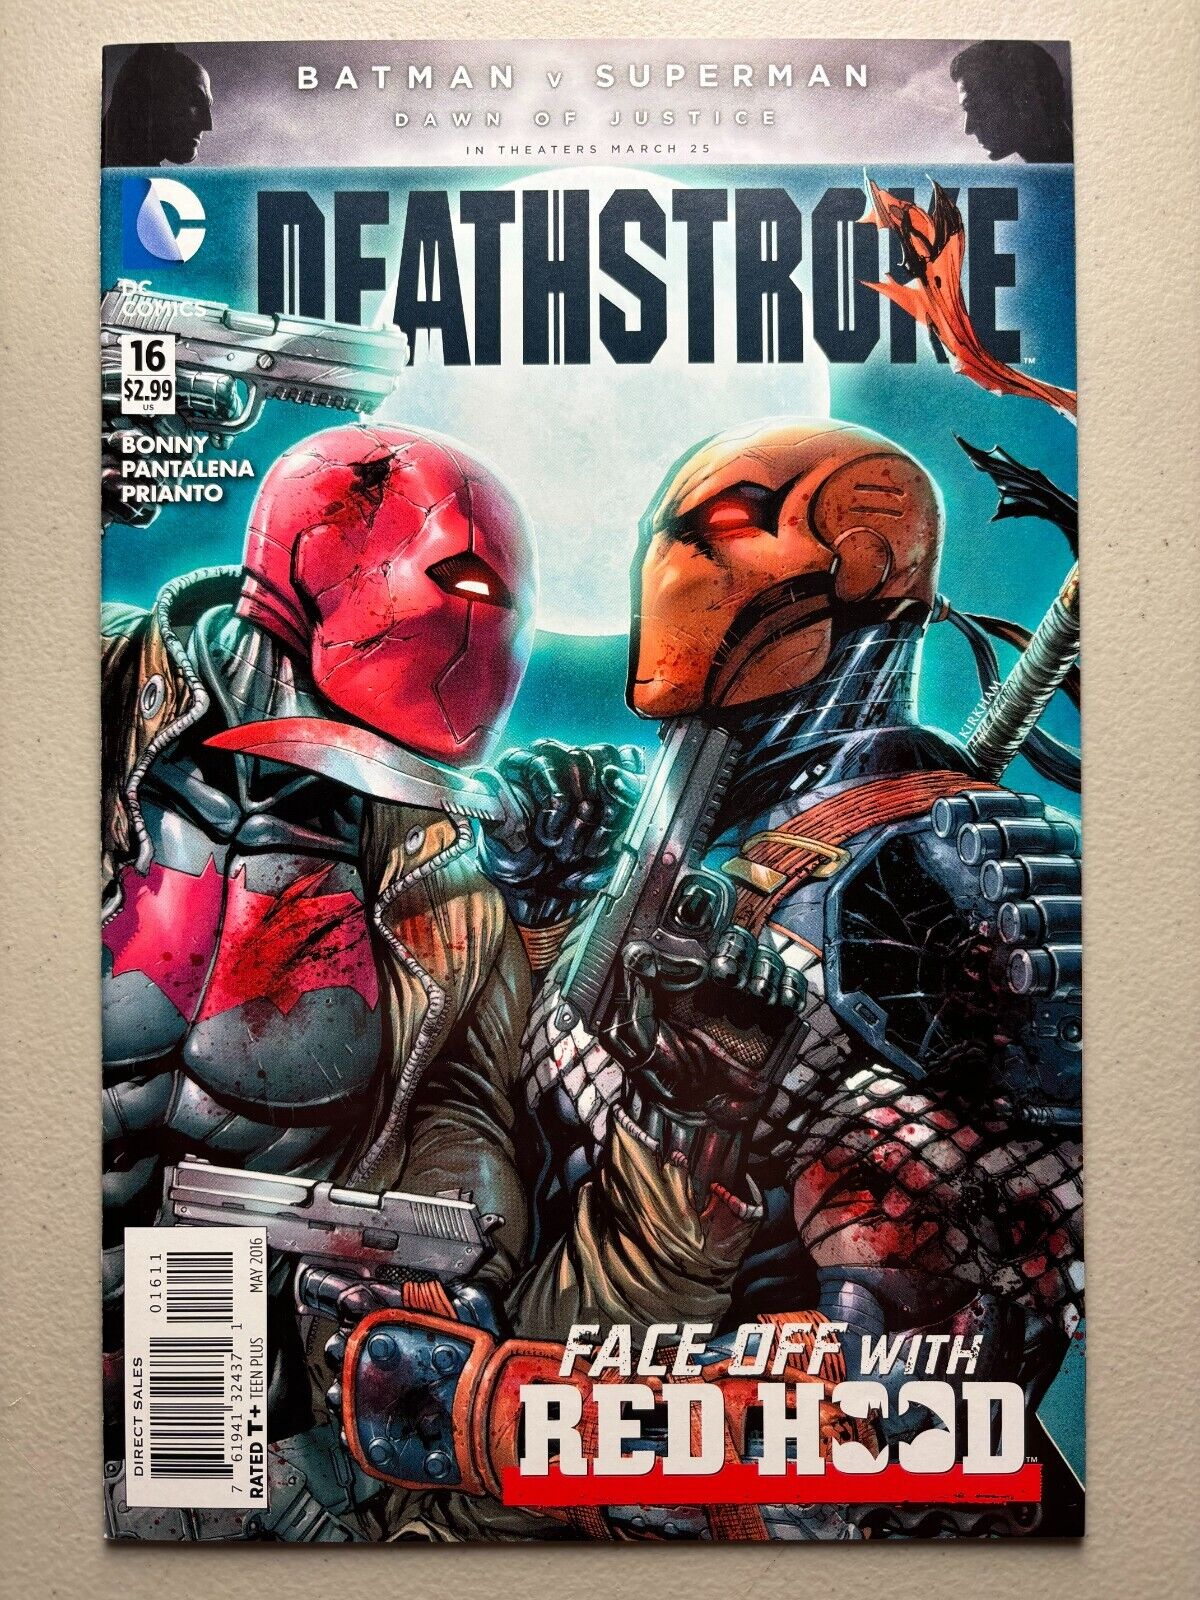 Deathstroke #16 • Tyler Kirkham Cover with Red Hood • 2016 DC Comics